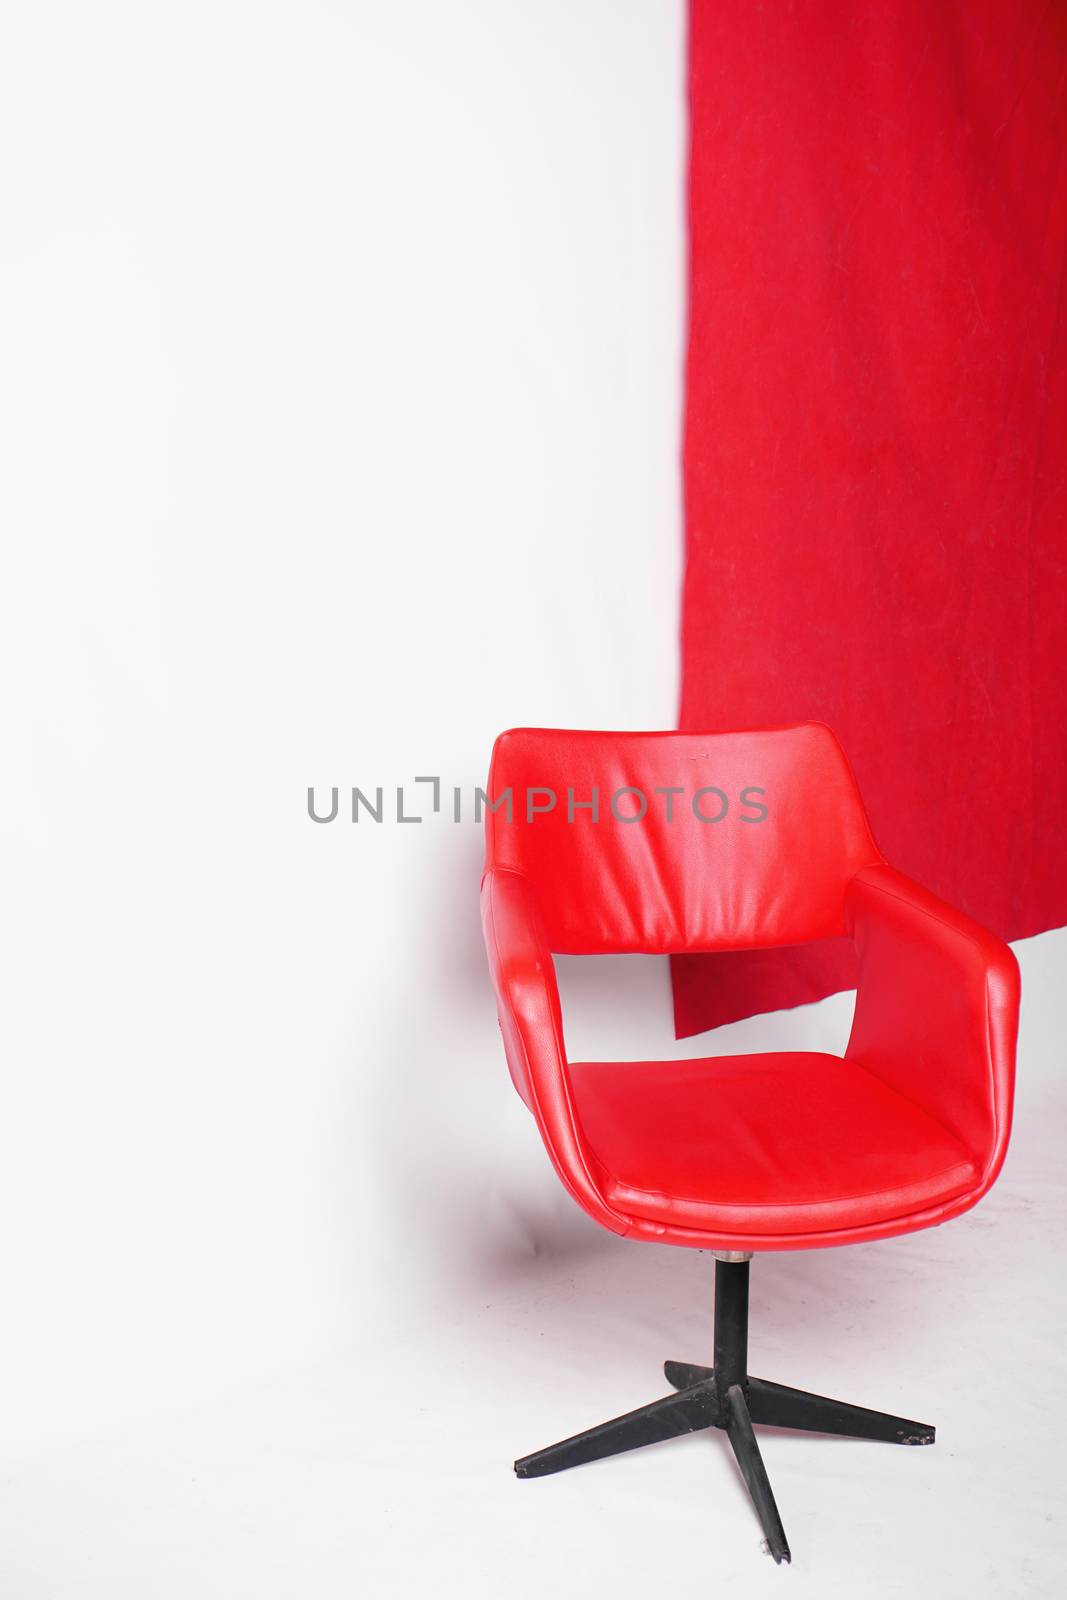 Modern red armchair on a white background in the studio - vertical photo